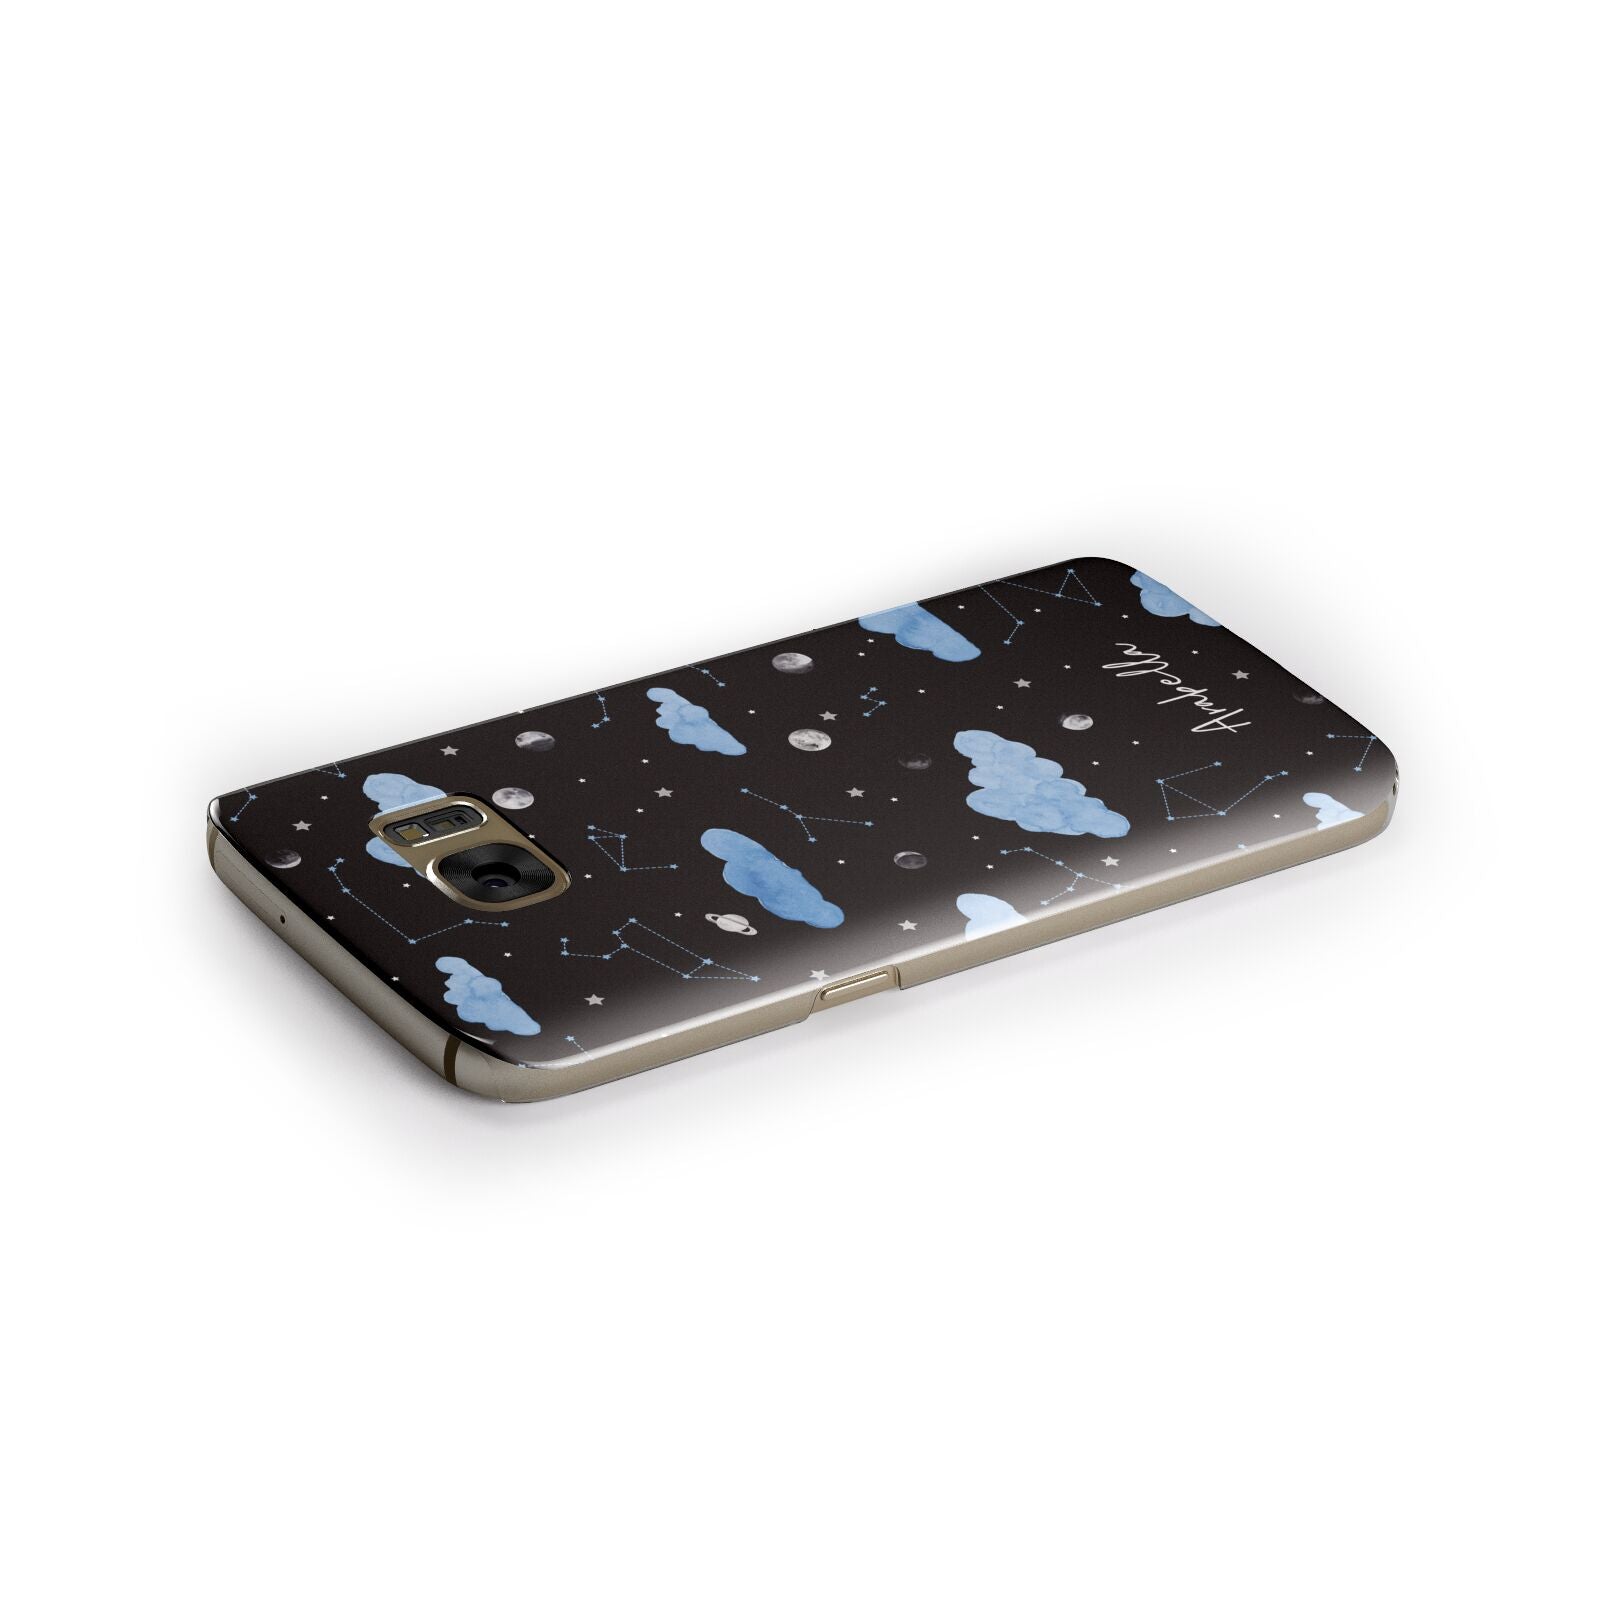 Cloudy Night Sky with Name Samsung Galaxy Case Side Close Up